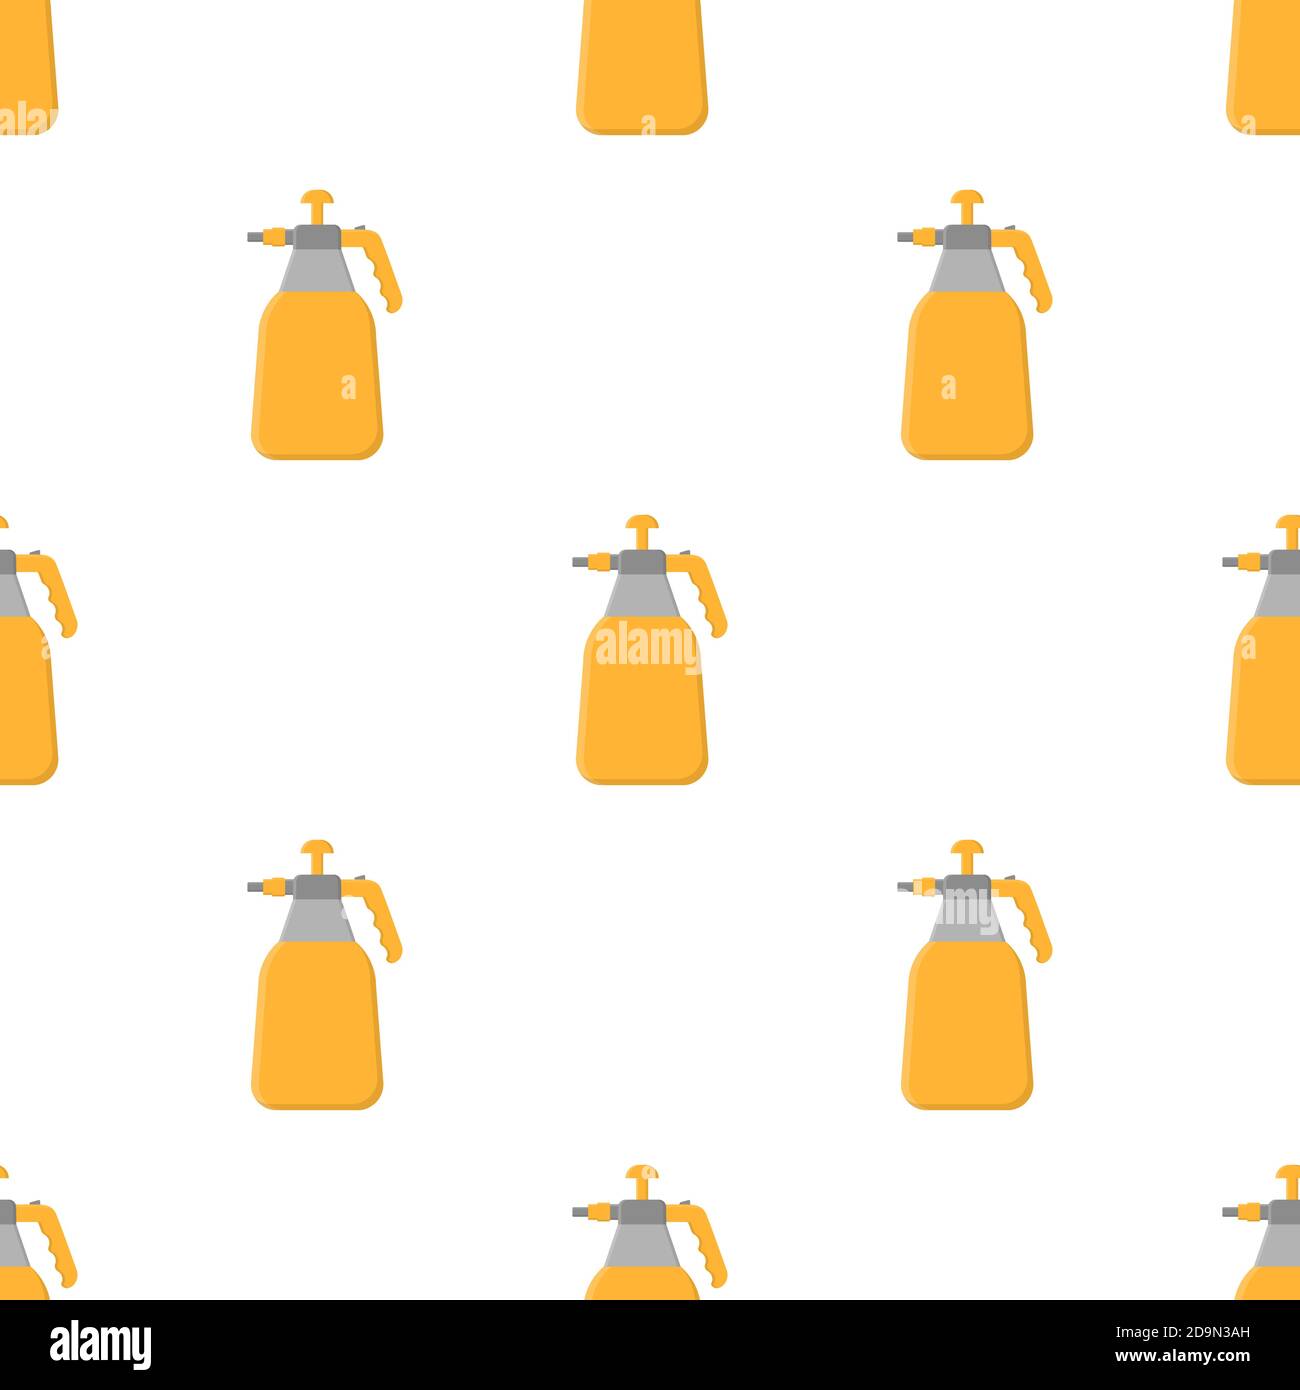 Seamless pattern with cartoon garden sprayer on white background. Gardening tool. Vector illustration for any design. Stock Vector